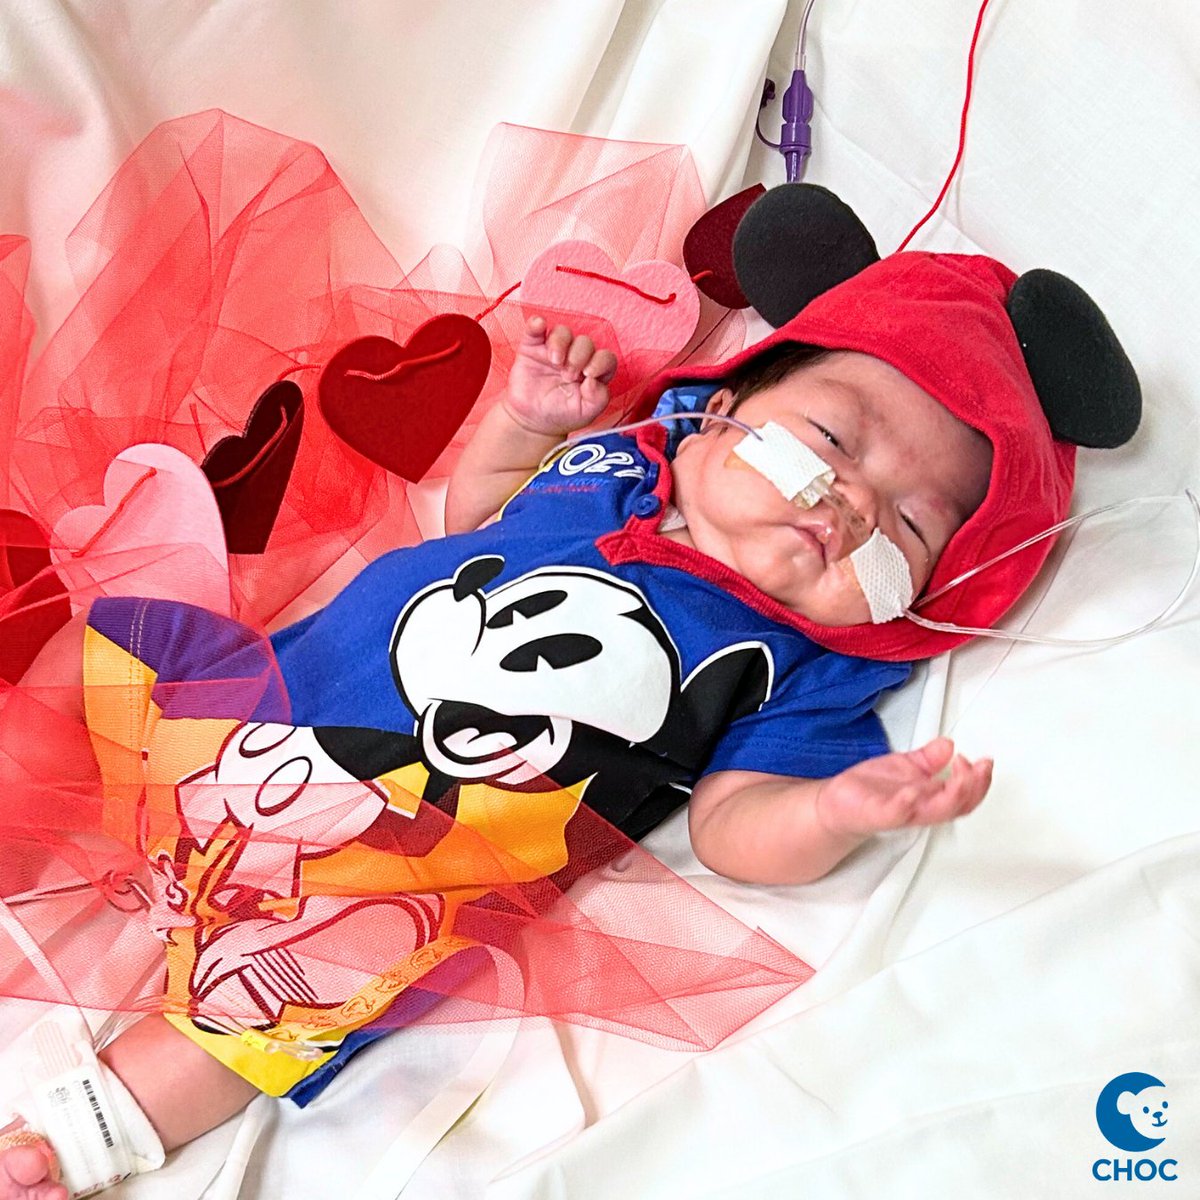 Sending you all some Valentine's love from our littlest patients in our Neonatal Intensive Care Unit and Small Baby Unit!